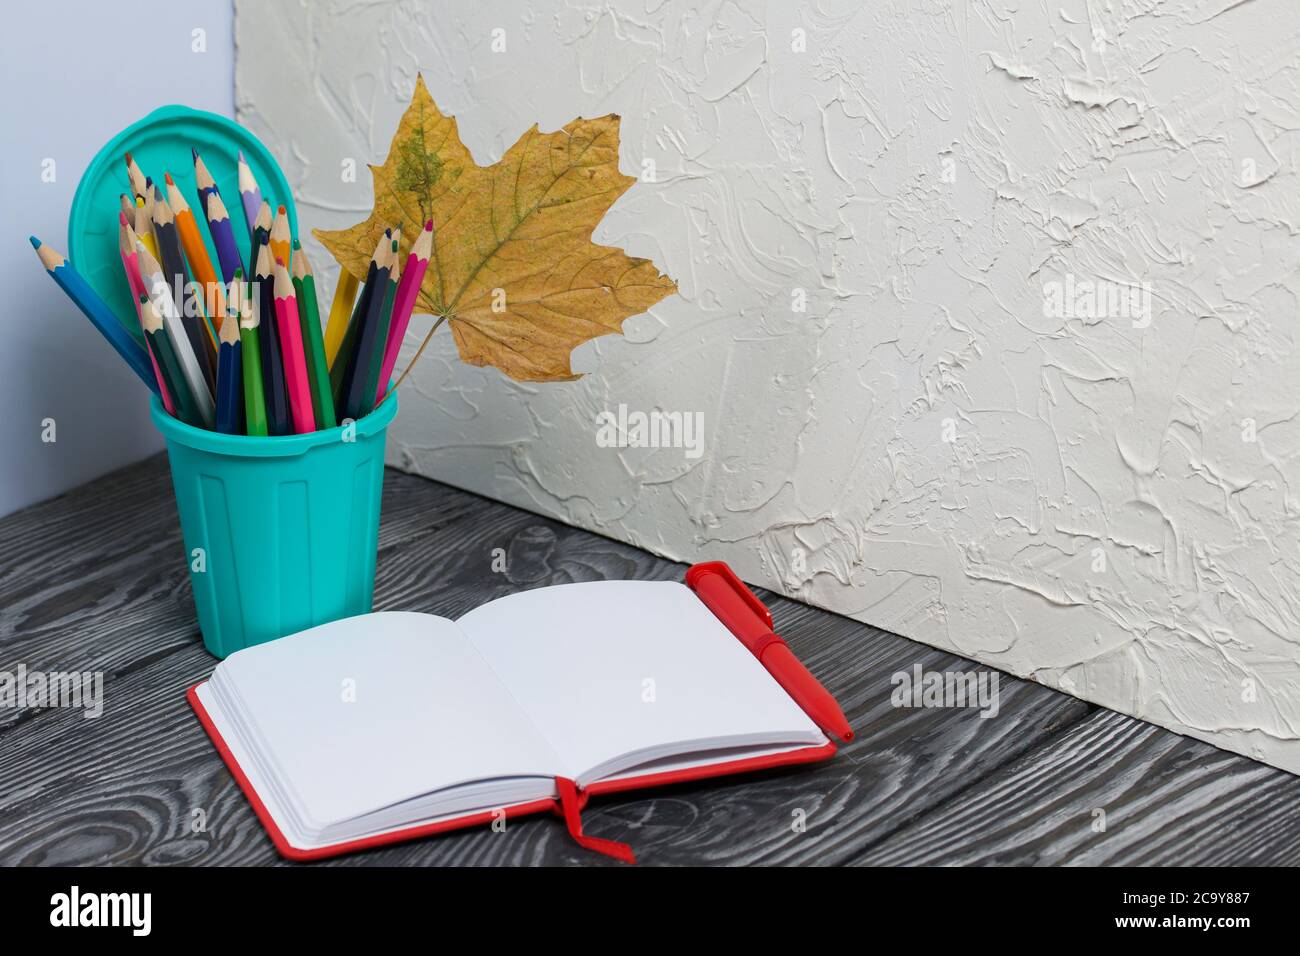 A pencil case in the form of a trash can. It contains colored pencils.  Nearby is a notebook for notes. Dried maple leaves are added to the  composition Stock Photo - Alamy